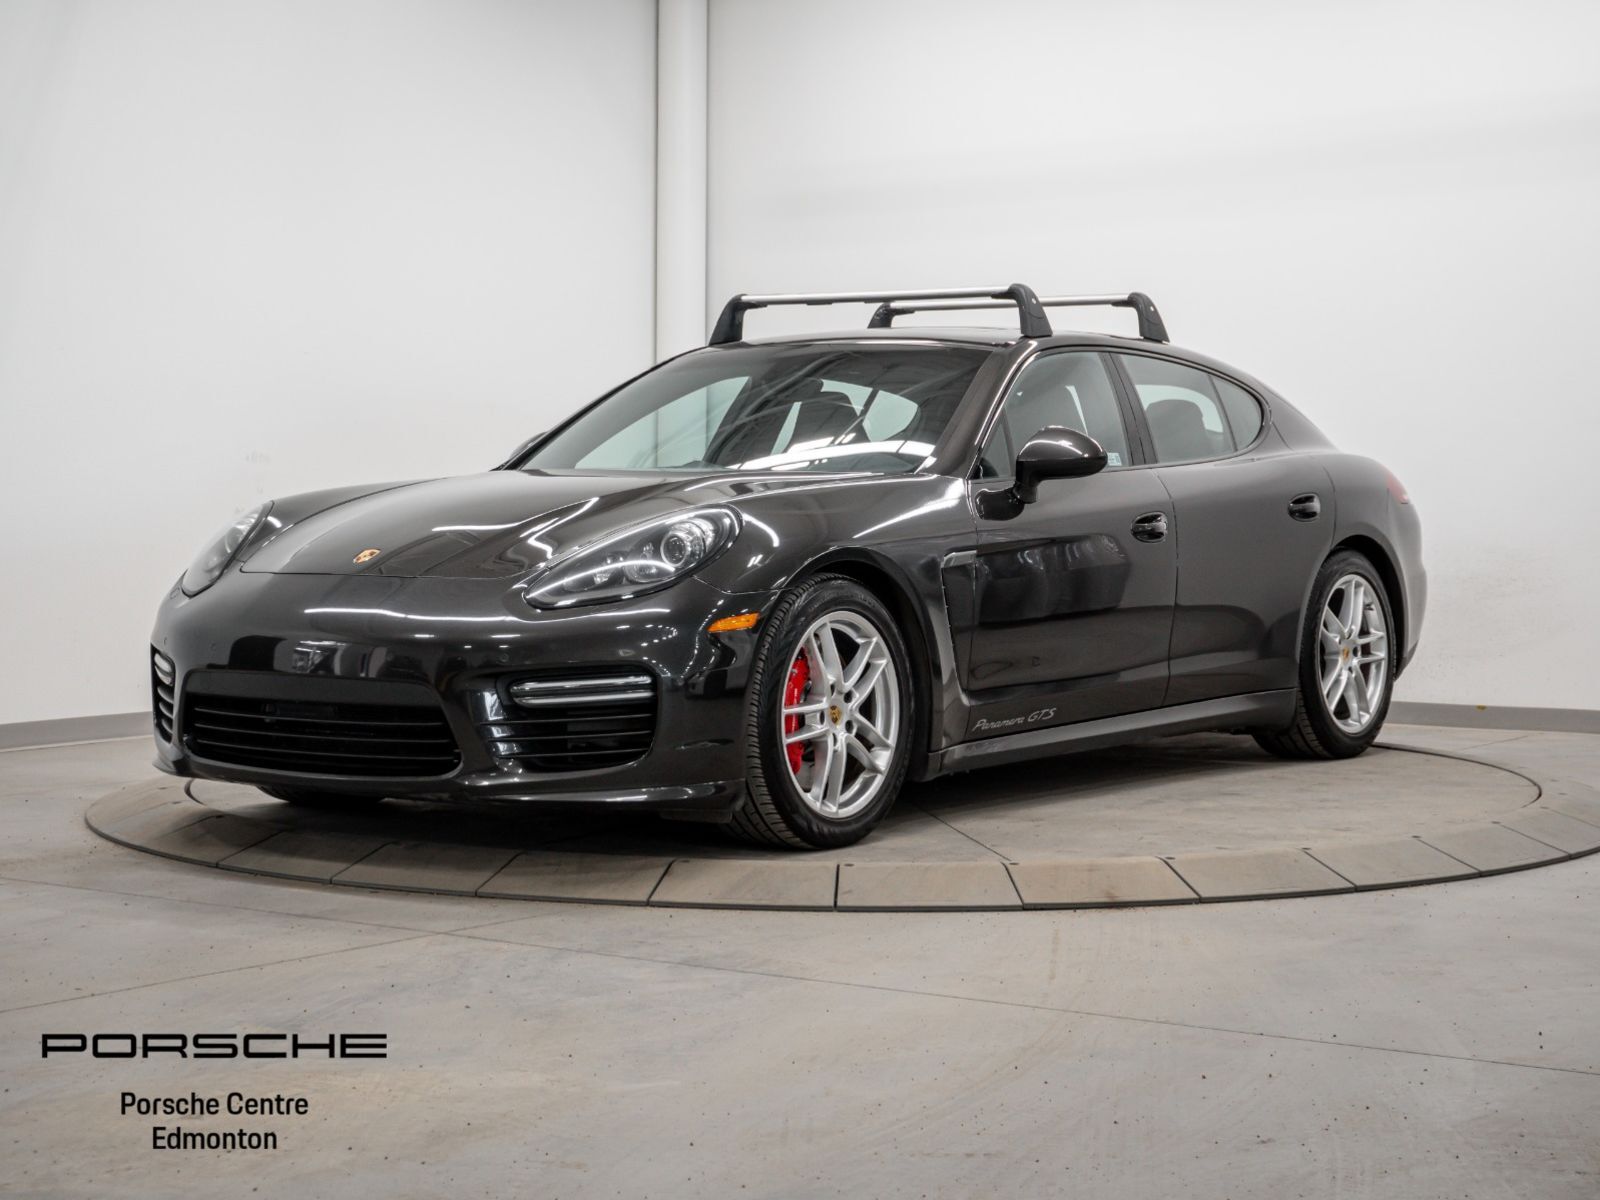 2014 Porsche Panamera | One Owner - No Accidents | Two Sets of Wheels an